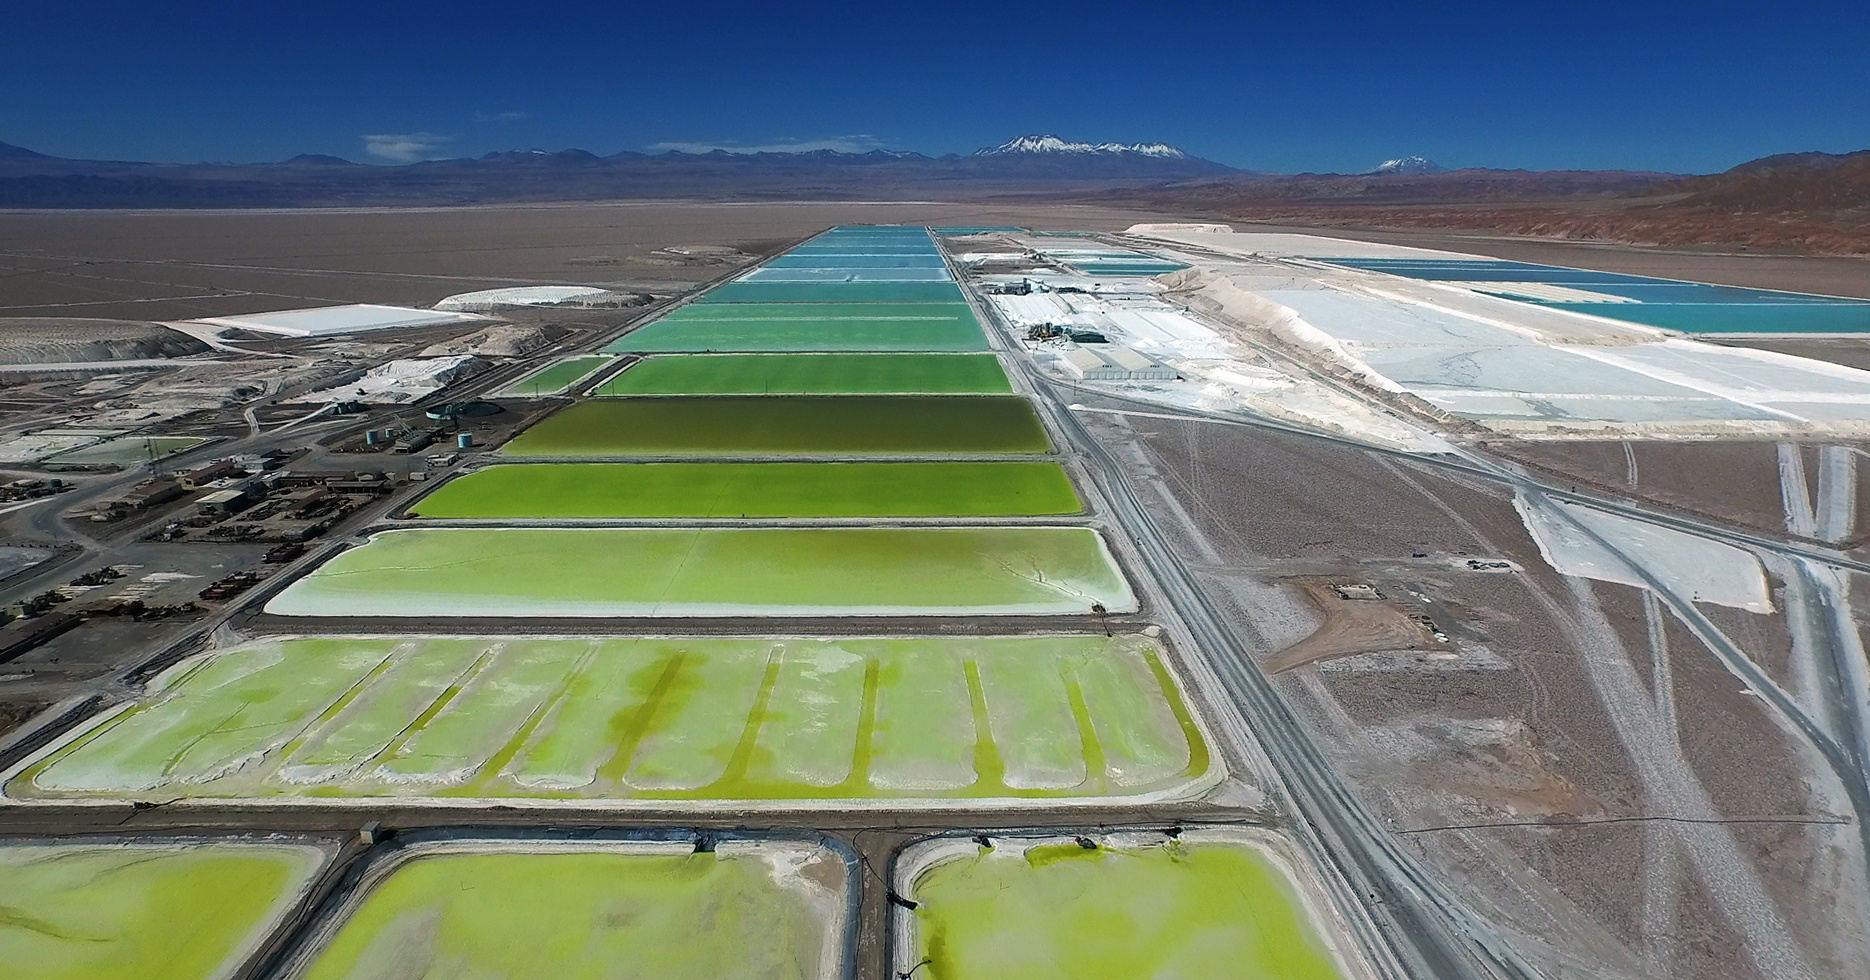 Unknown Fields camera drone flies above the Atacama Desert to map the process of Lithium brine being refined through a landscape of evaporation ponds. 